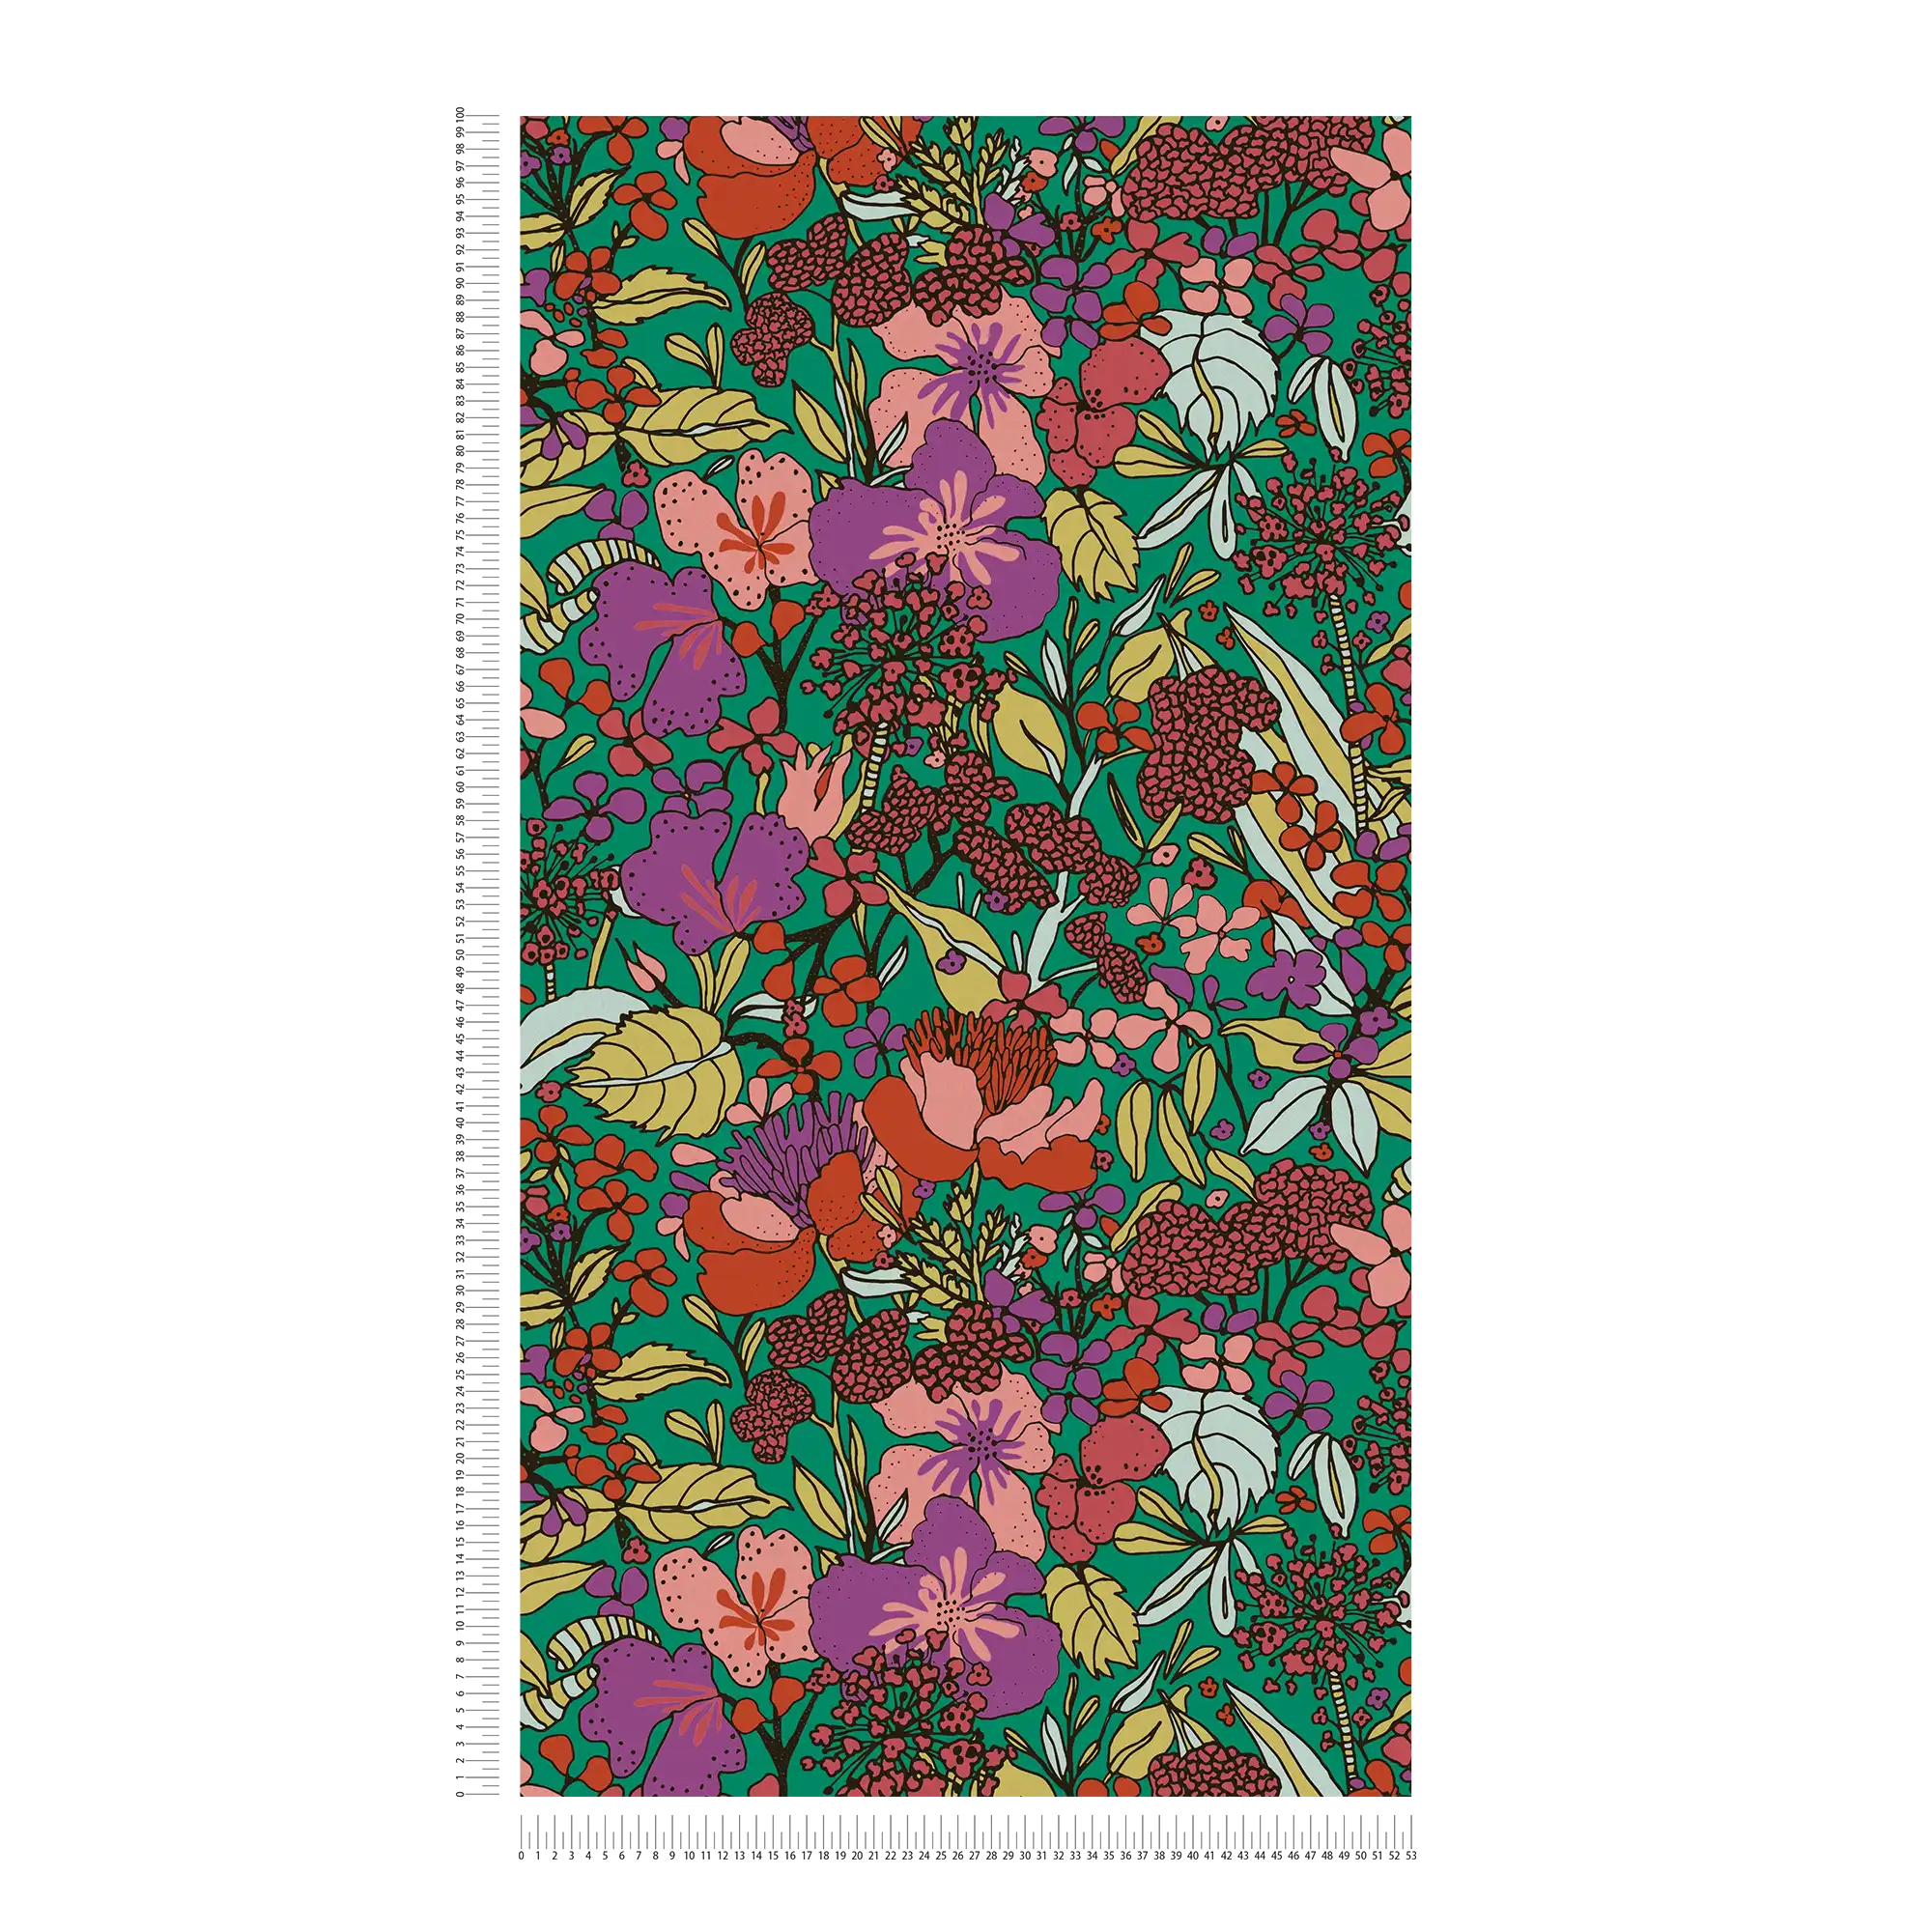             wallpaper flowers pattern colourful in colour block style - colourful, green, red
        